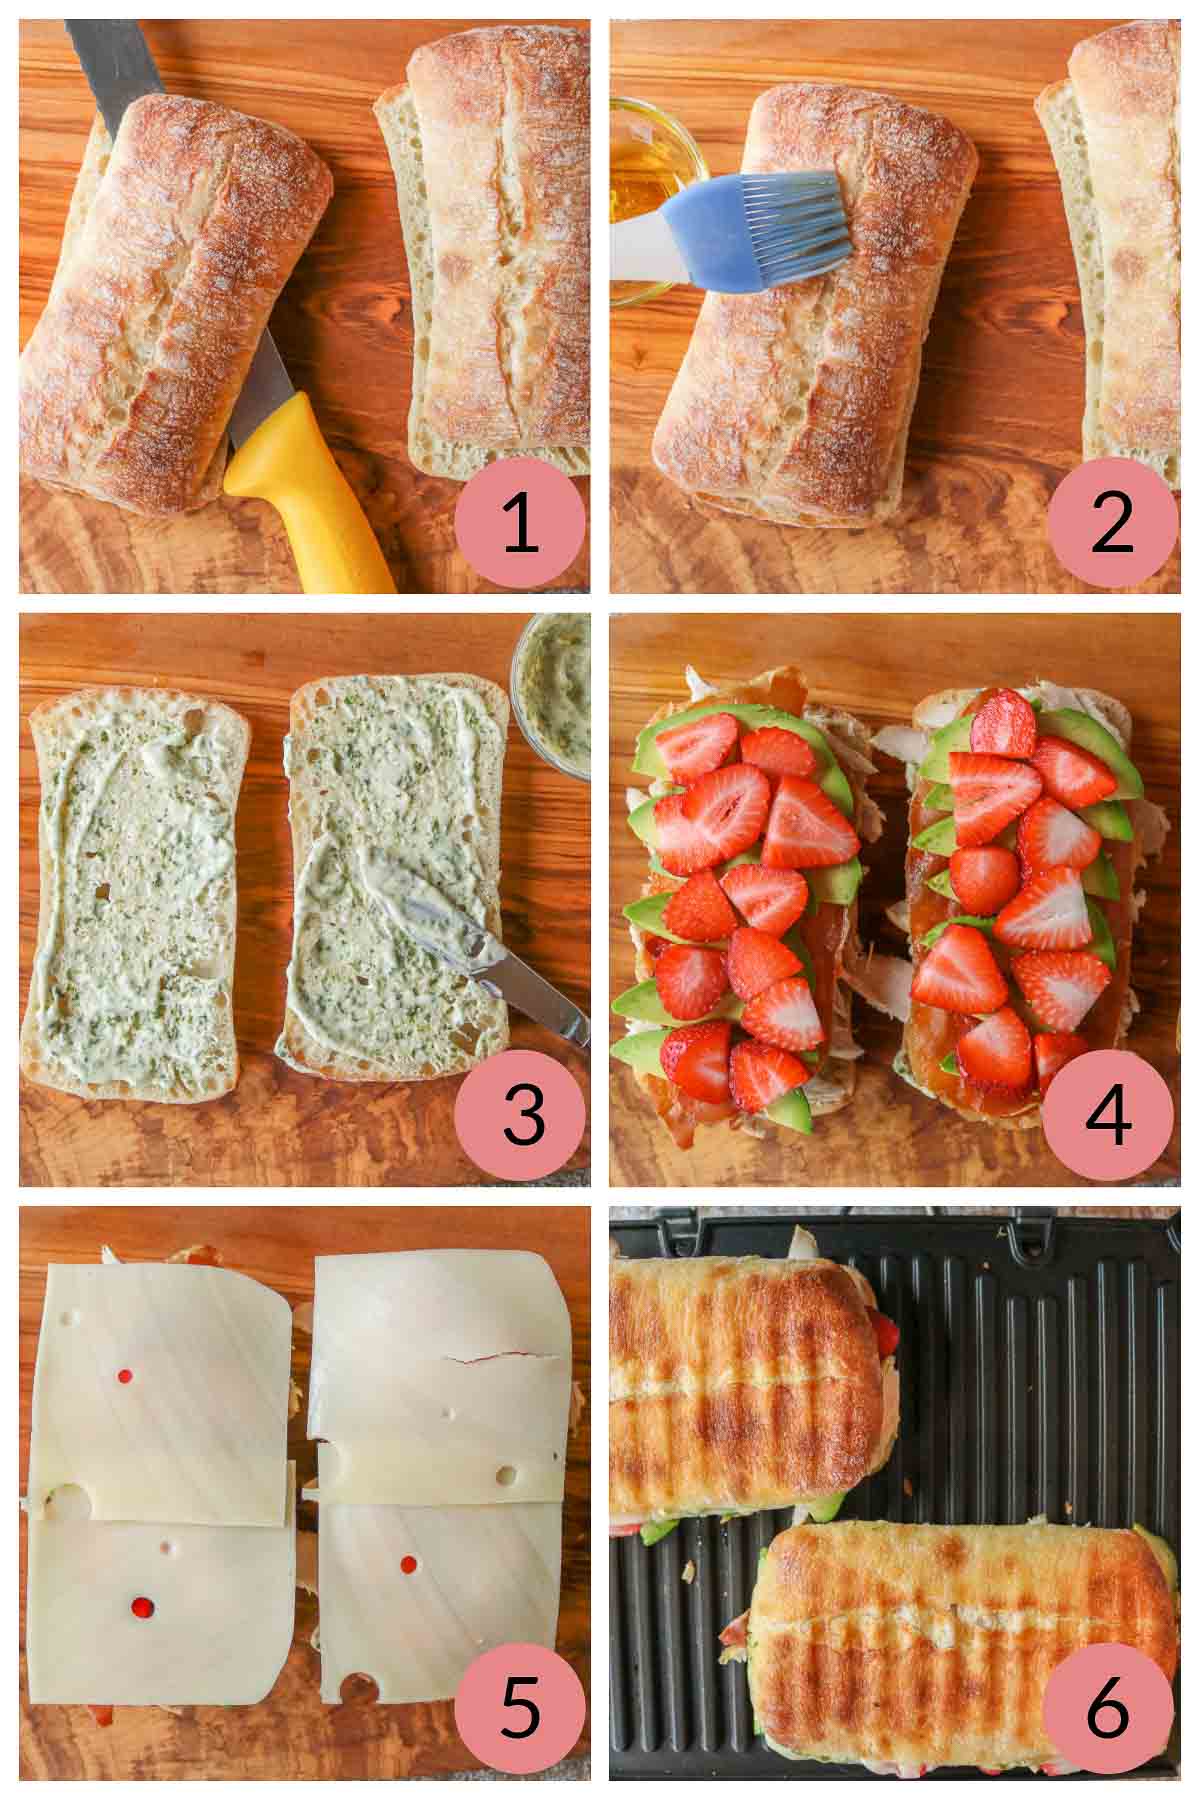 Collage of steps to make turkey panini sandwiches.